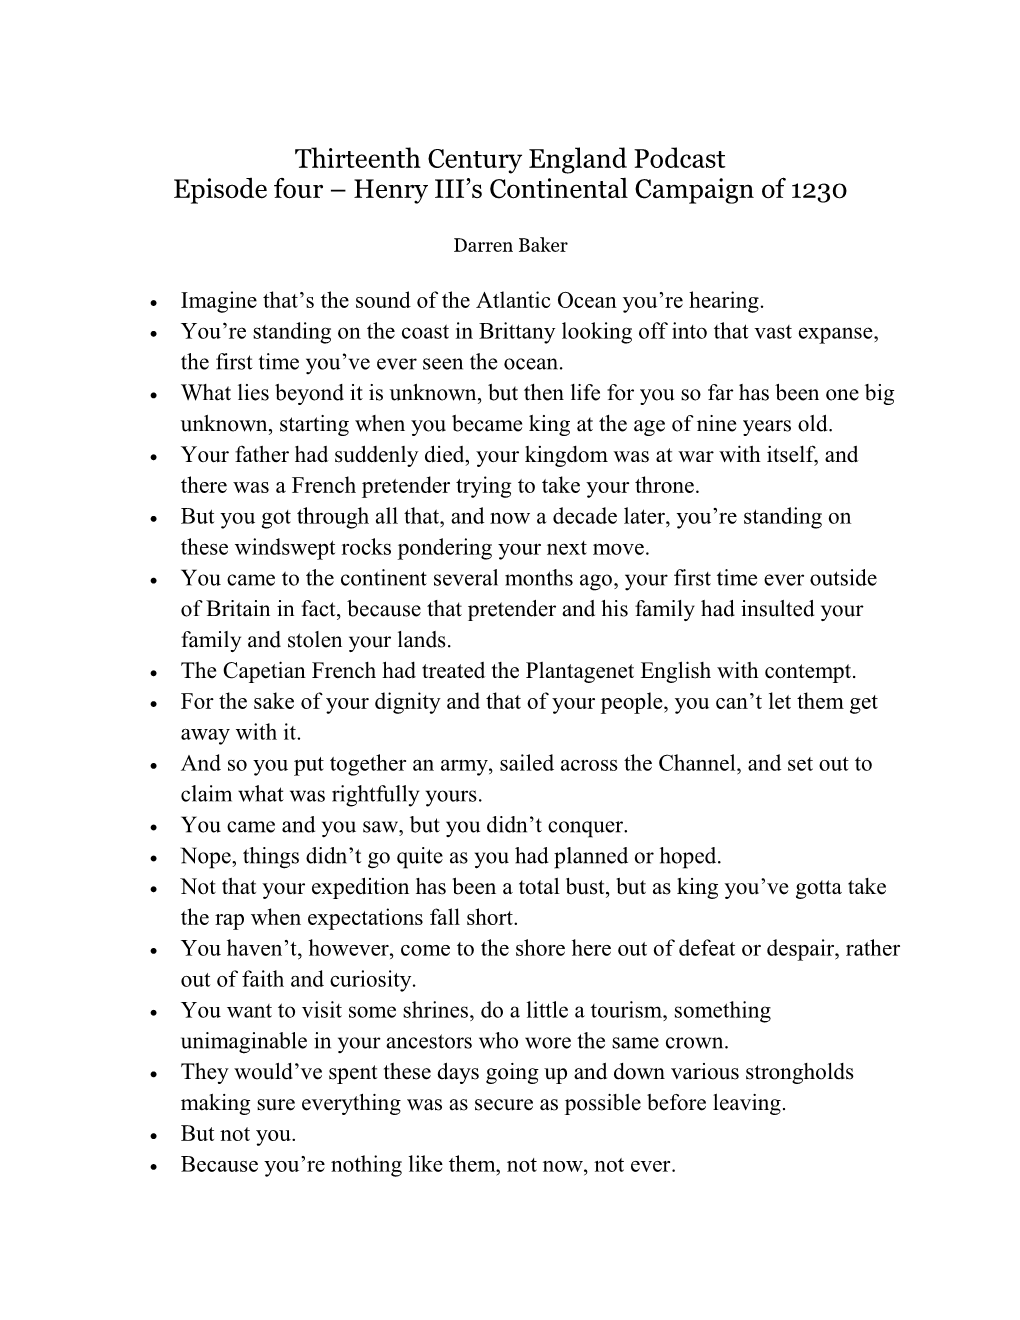 Henry III's Continental Campaign of 1230